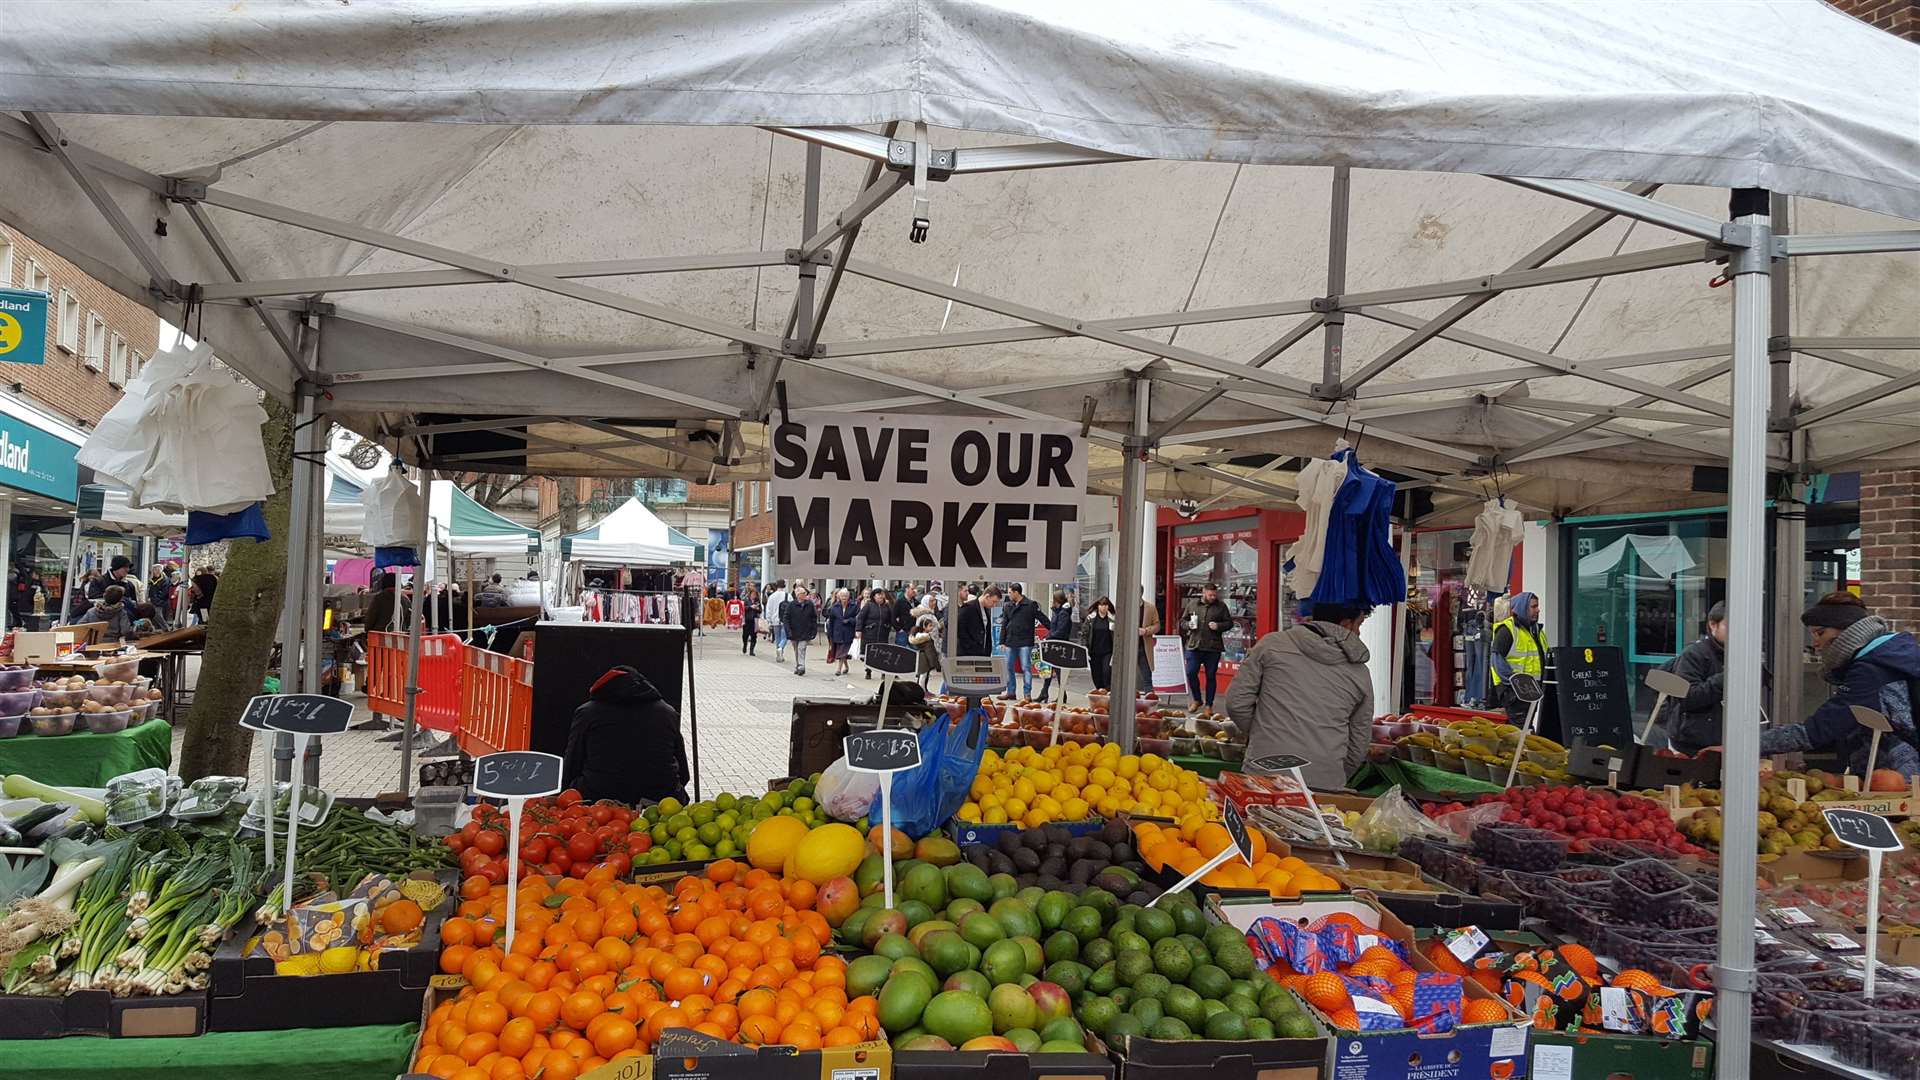 A petition was launched to save the market in Canterbury city centre